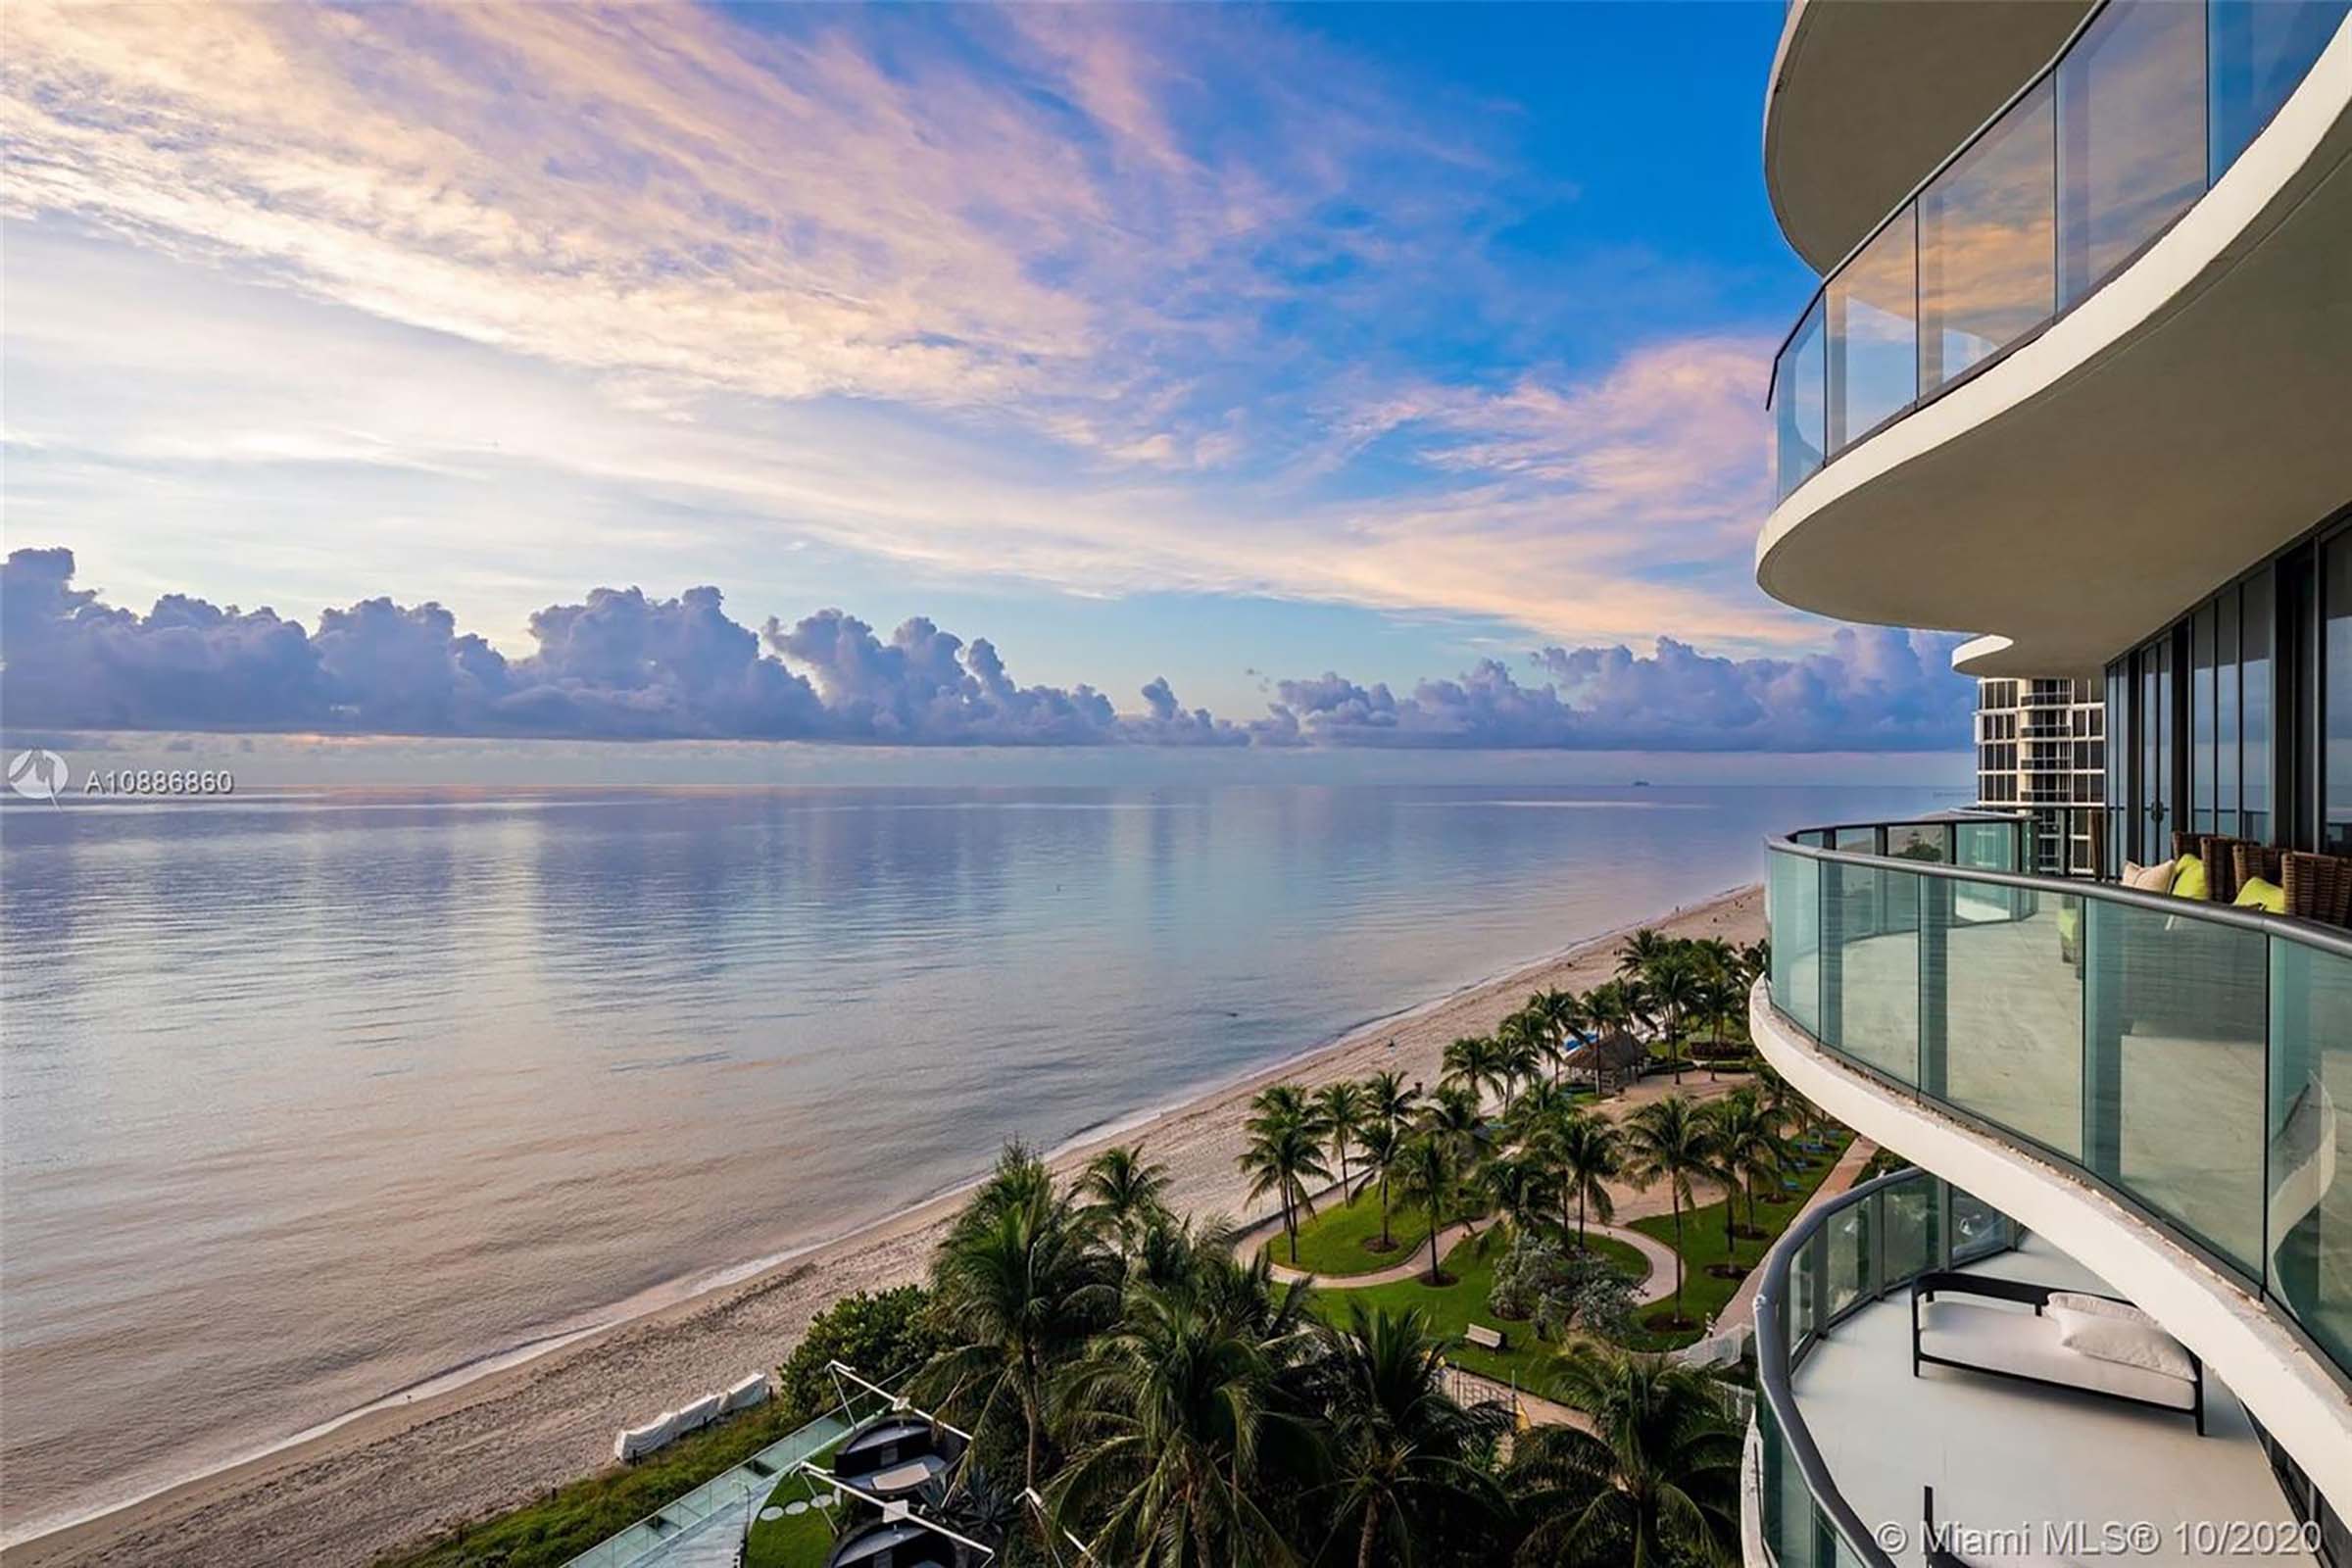 The Many Miami Homes Of Messi